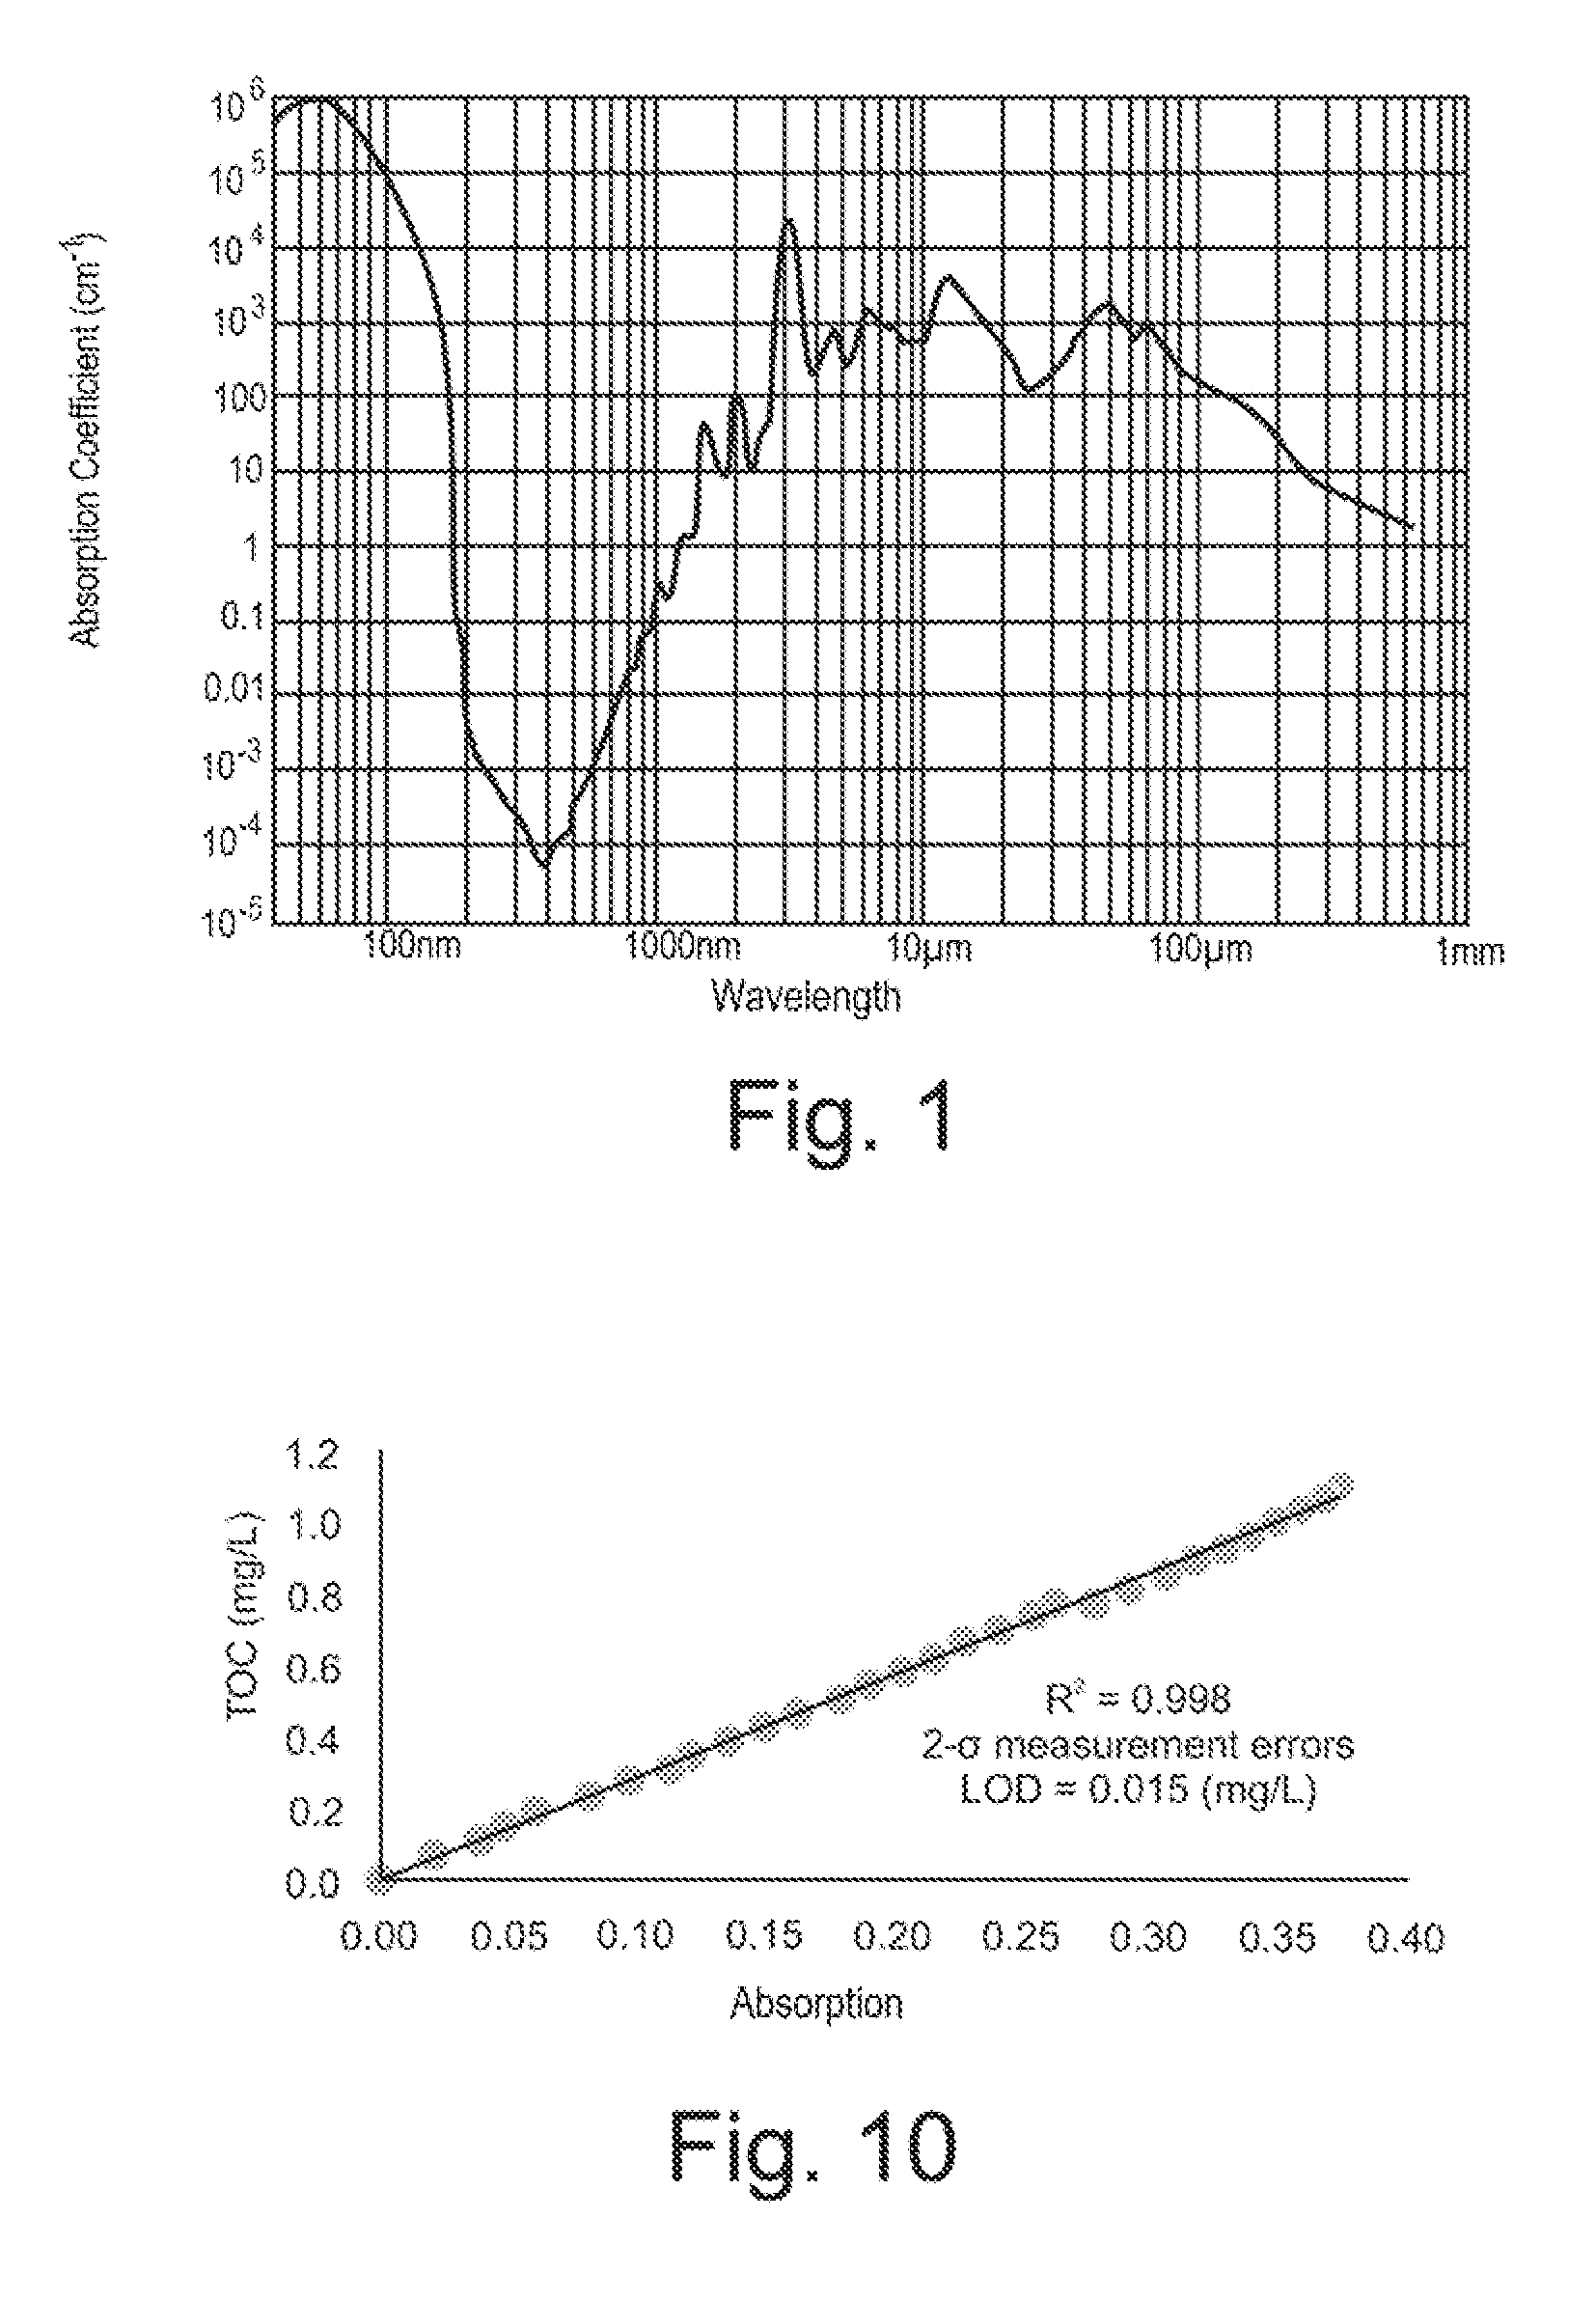 Method and Apparatus for the Optical Determination of Total Organic Carbon in Aqueous Streams